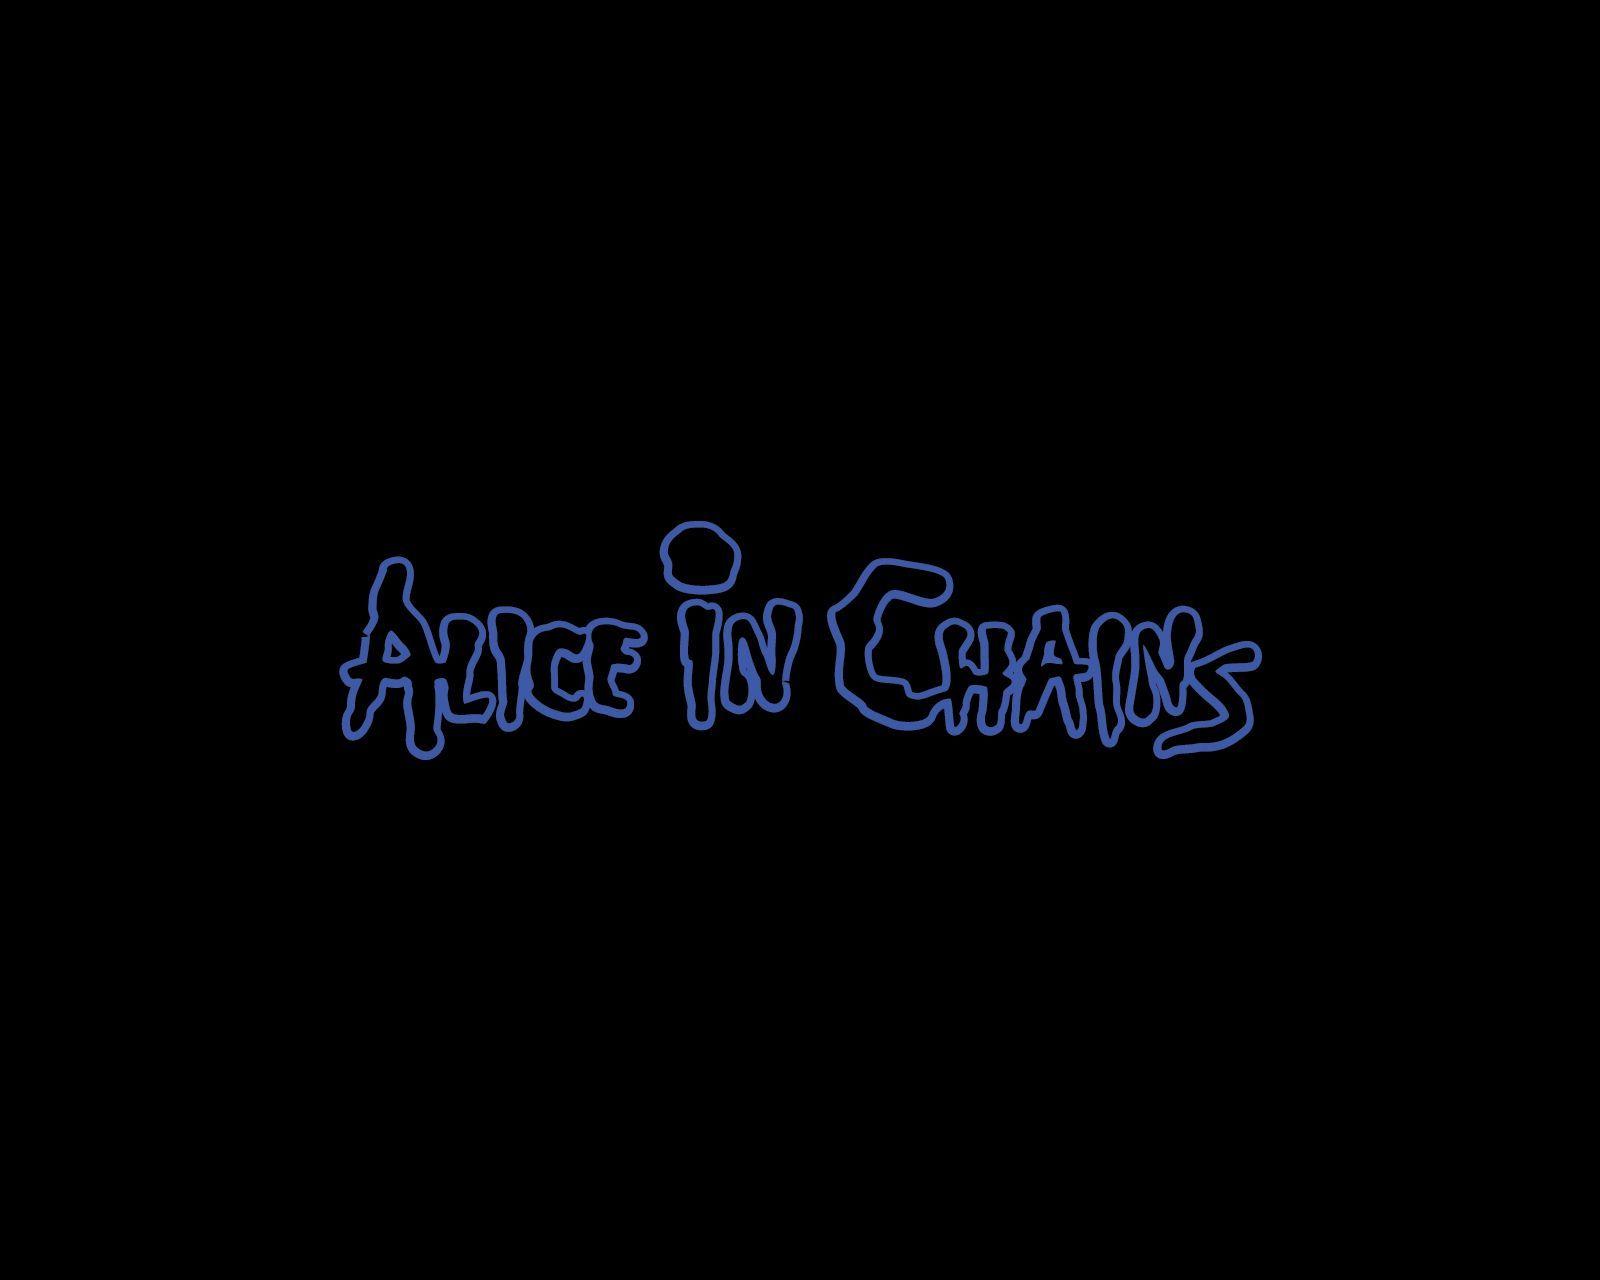 Wallpaper Alice in Chains Biography Rock